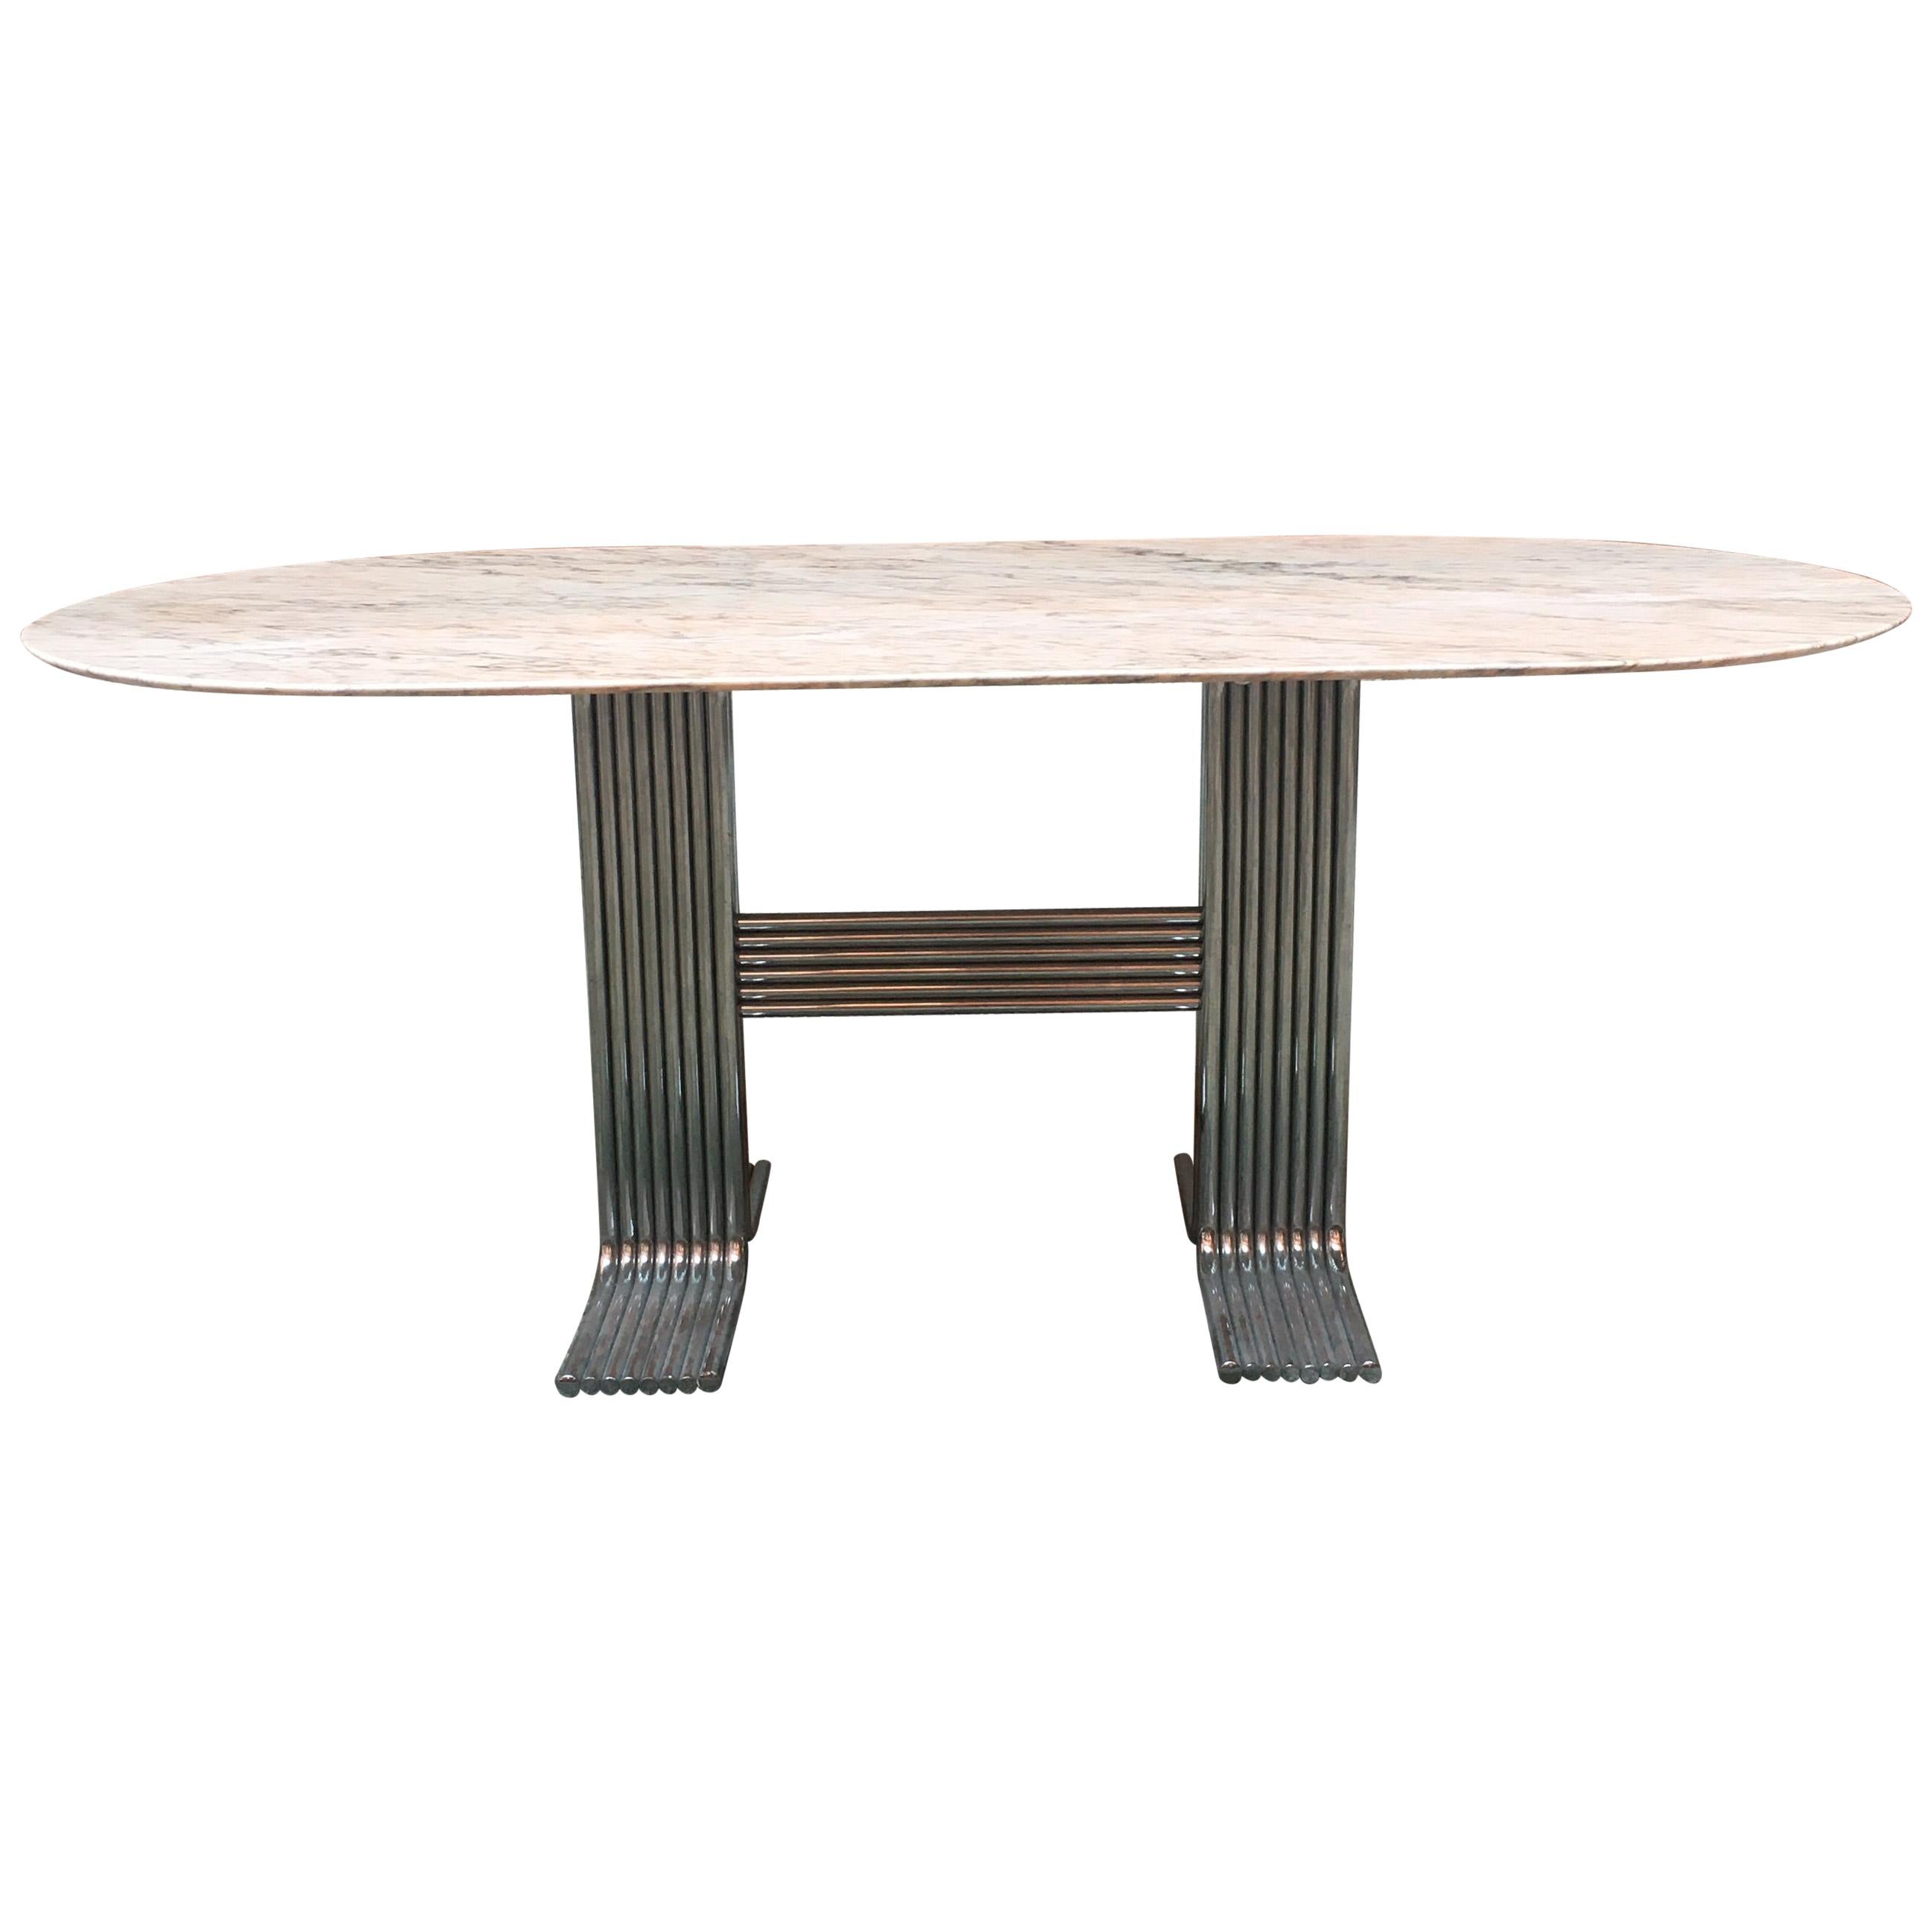 Italian Oval Marble Dining Table, 1970s